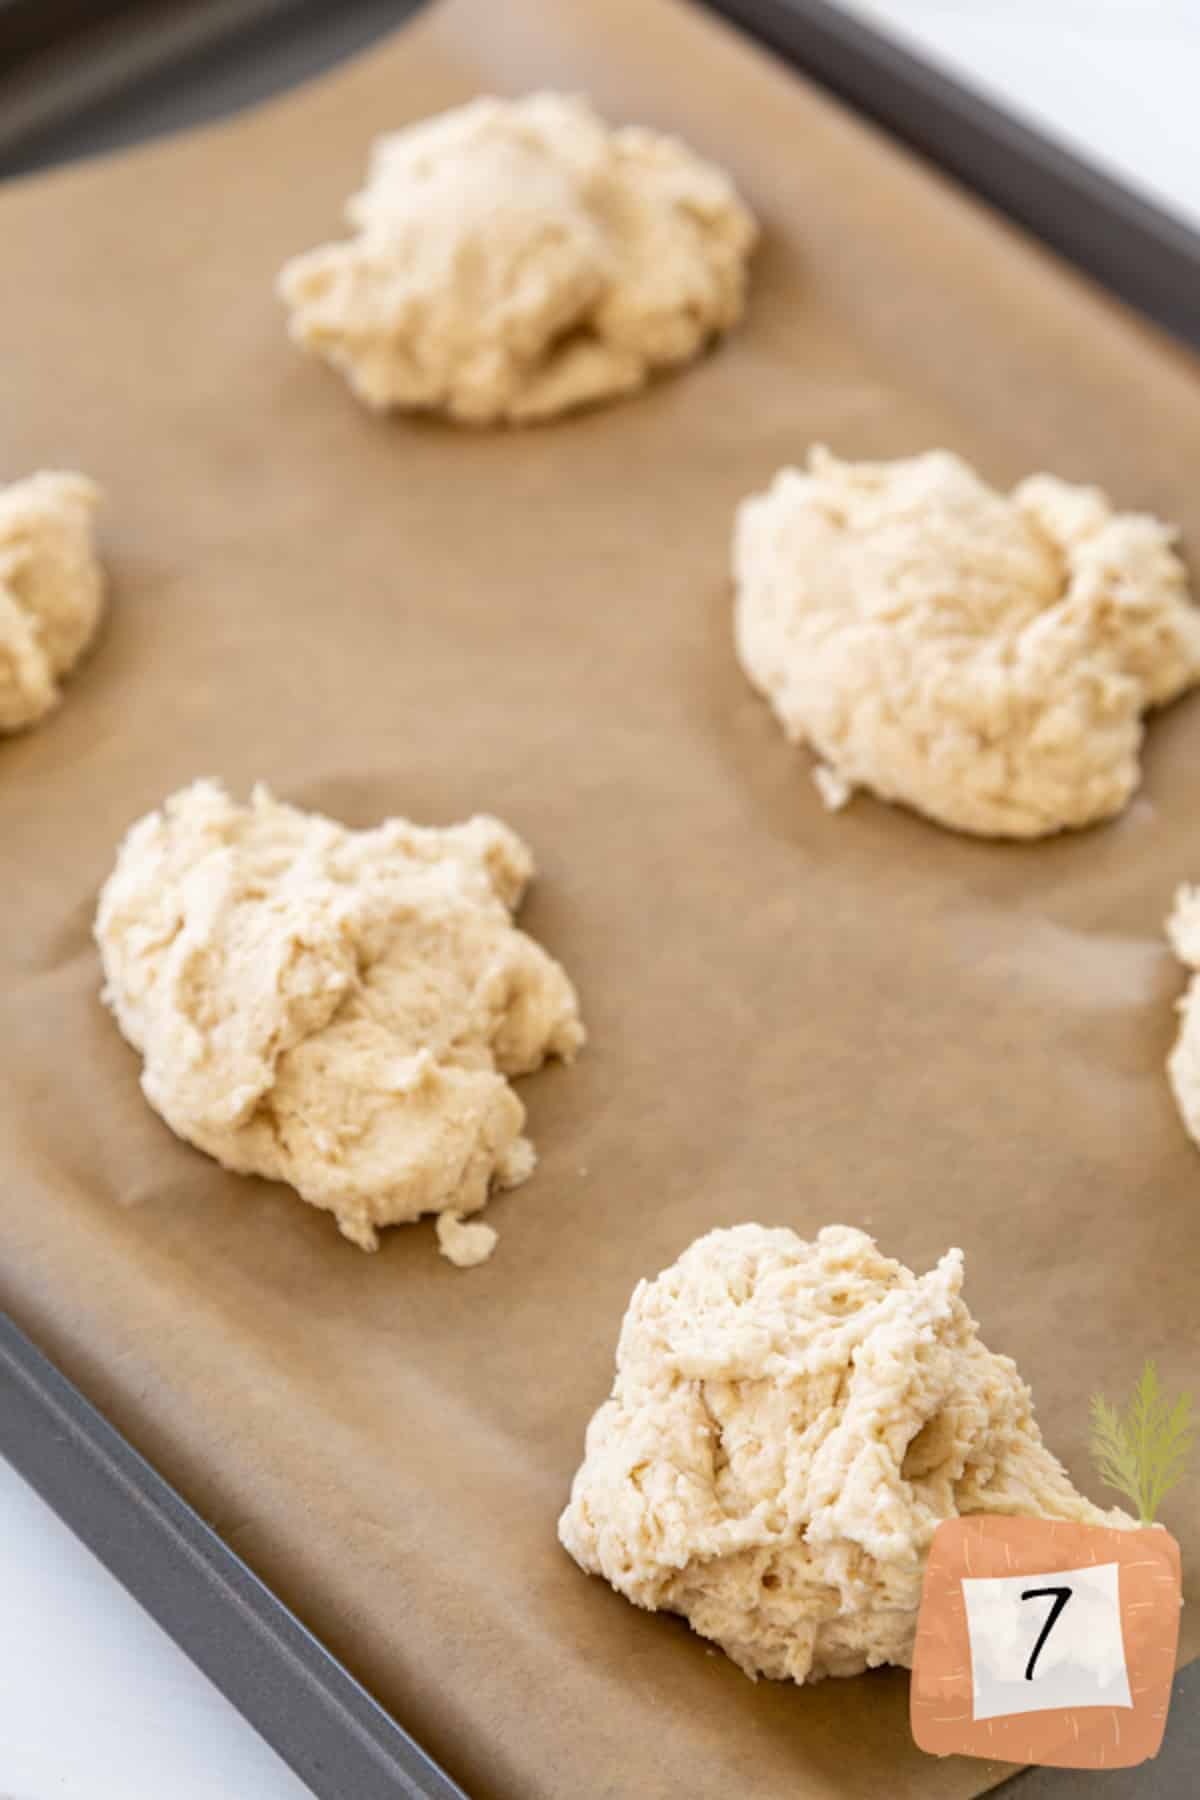 Unbaked biscuit dough on a baking sheet.